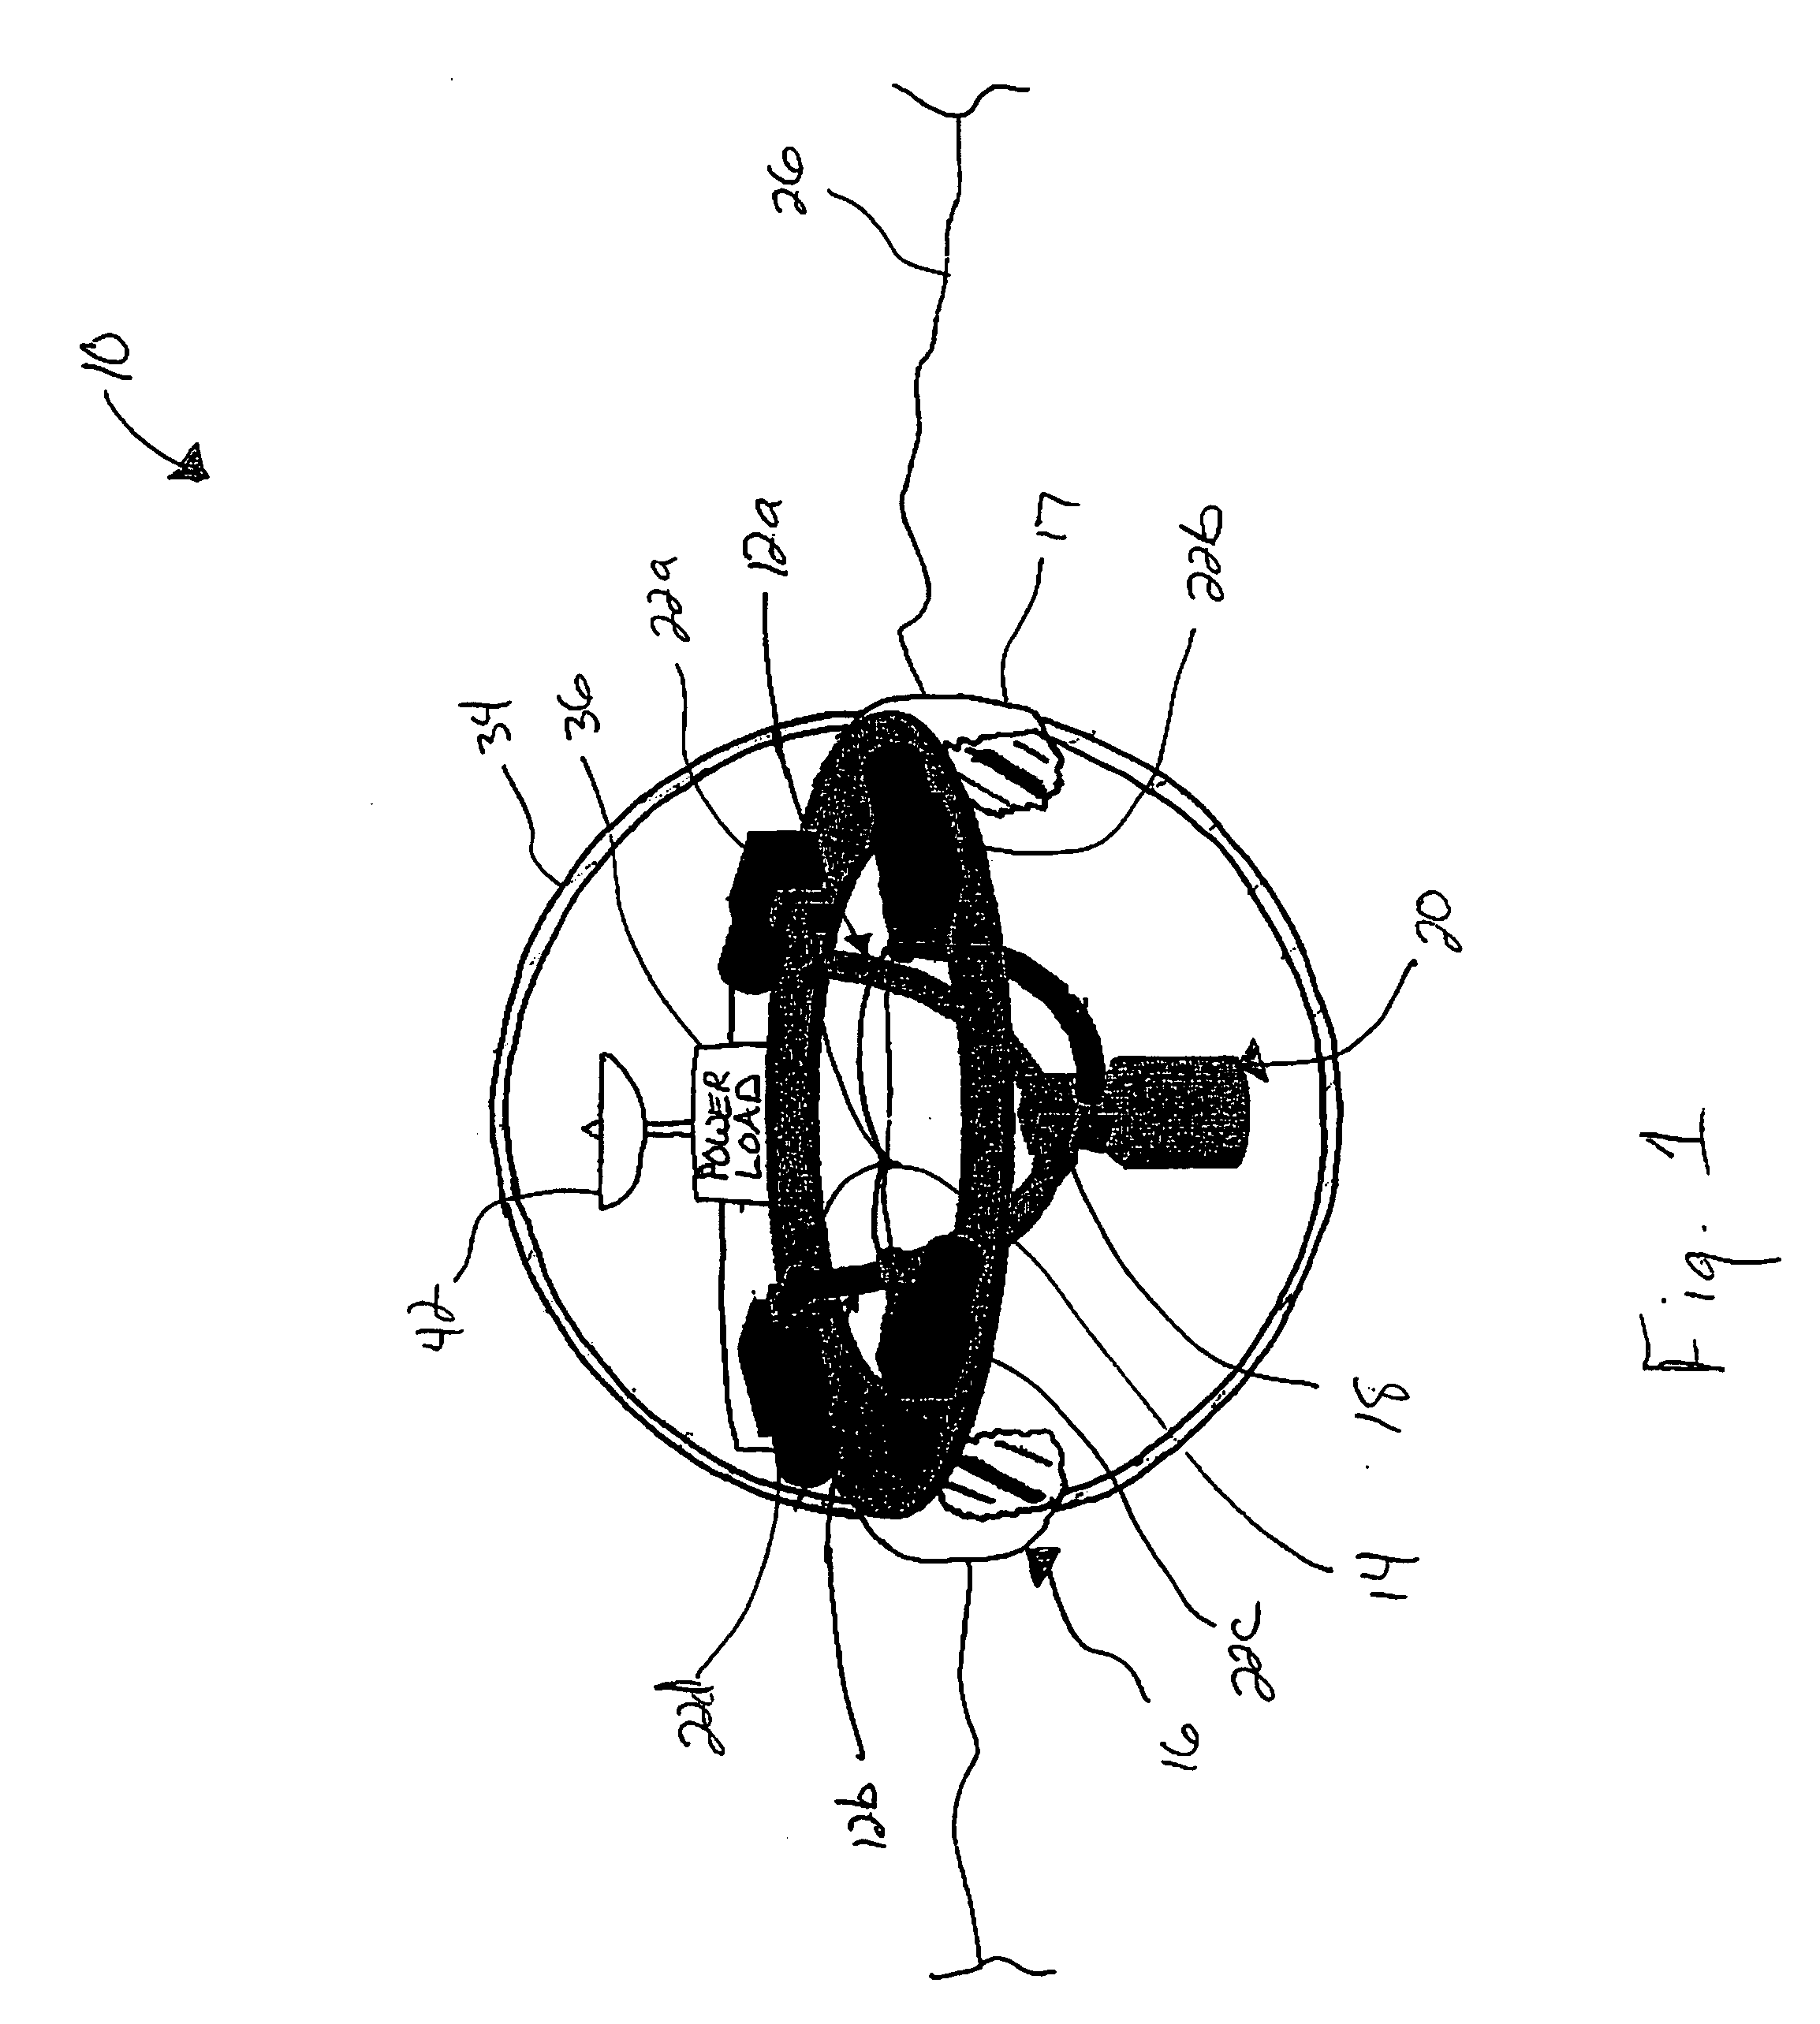 Apparatus for electrical signal generation based upon movement and associated methods